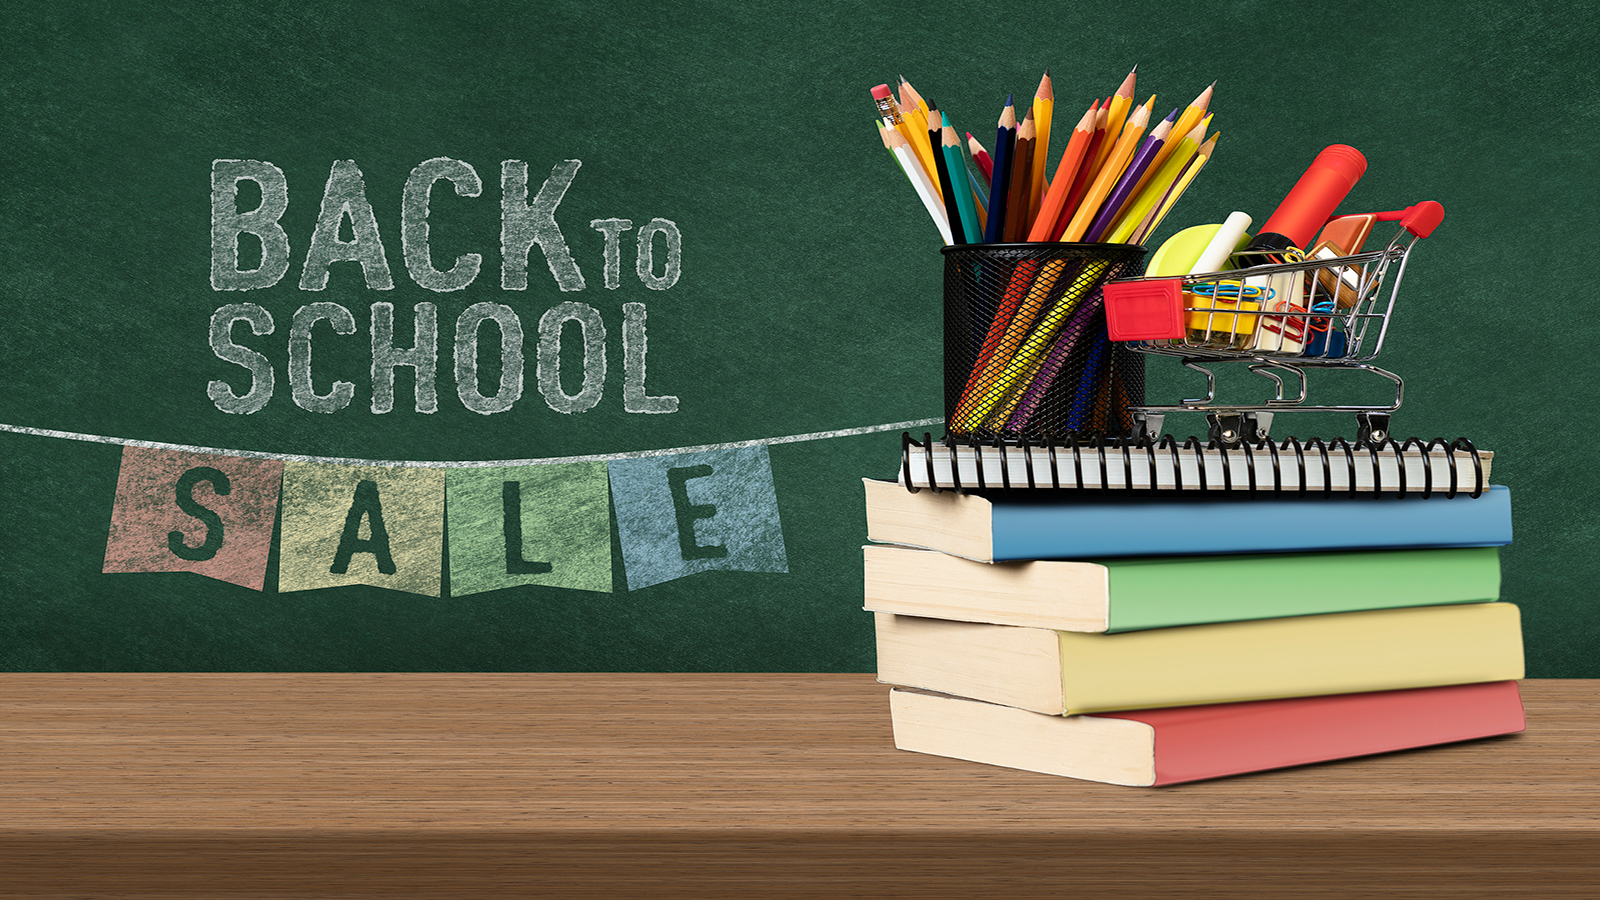 Amazon’s backtoschool sale sees some excellent discounts on Dell, HP